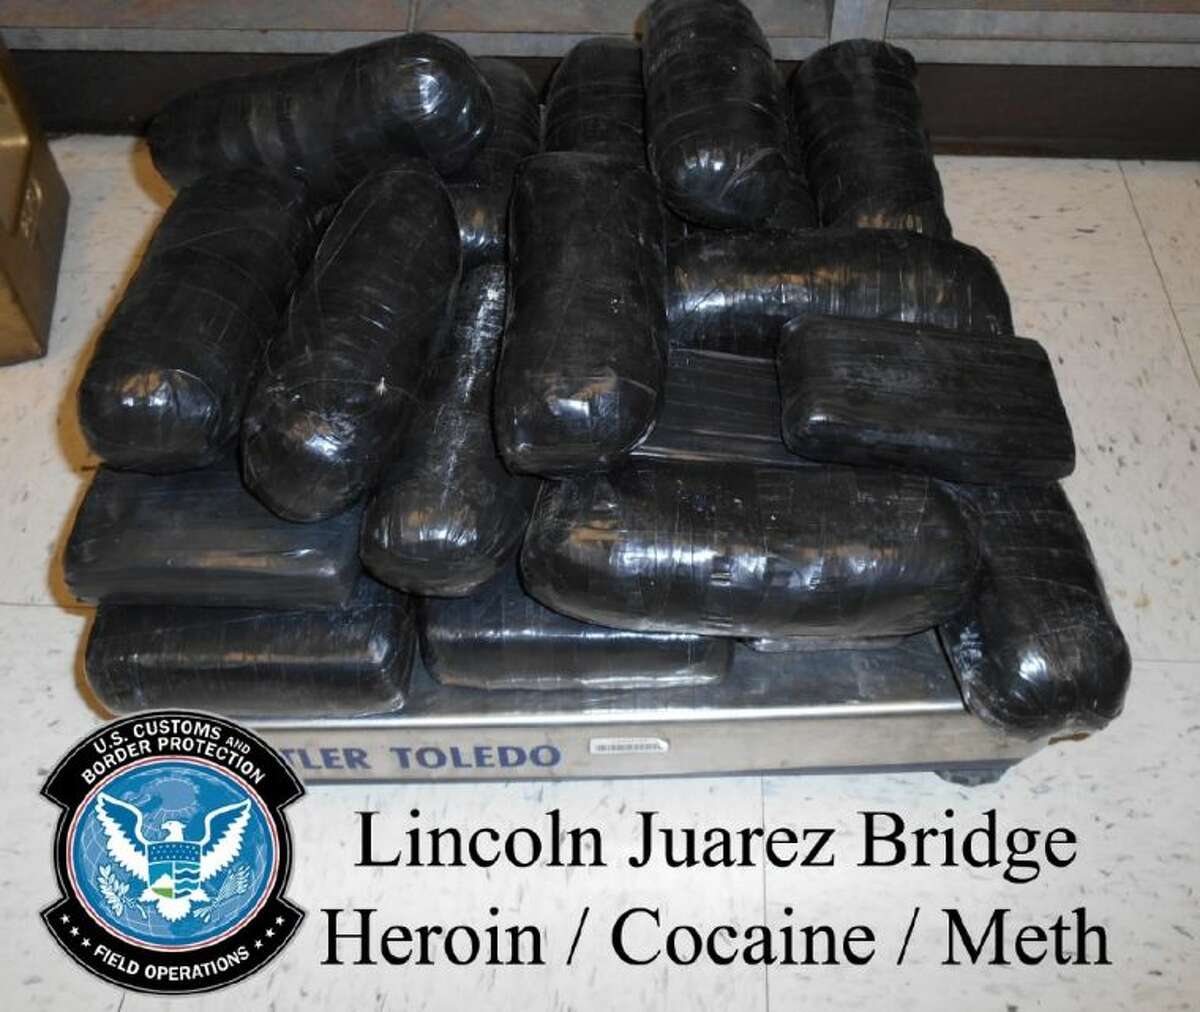 April 16, 2014:  A Pearland woman was caught at the U.S. and Mexico border with just over $1 million in concealed narcotics, according to U.S. Customs and Border Protection officials. Officers found 19 pounds of methamphetamine, 12 pounds of heroin and another 10 pounds in cocaine inside the car being driven by the woman.